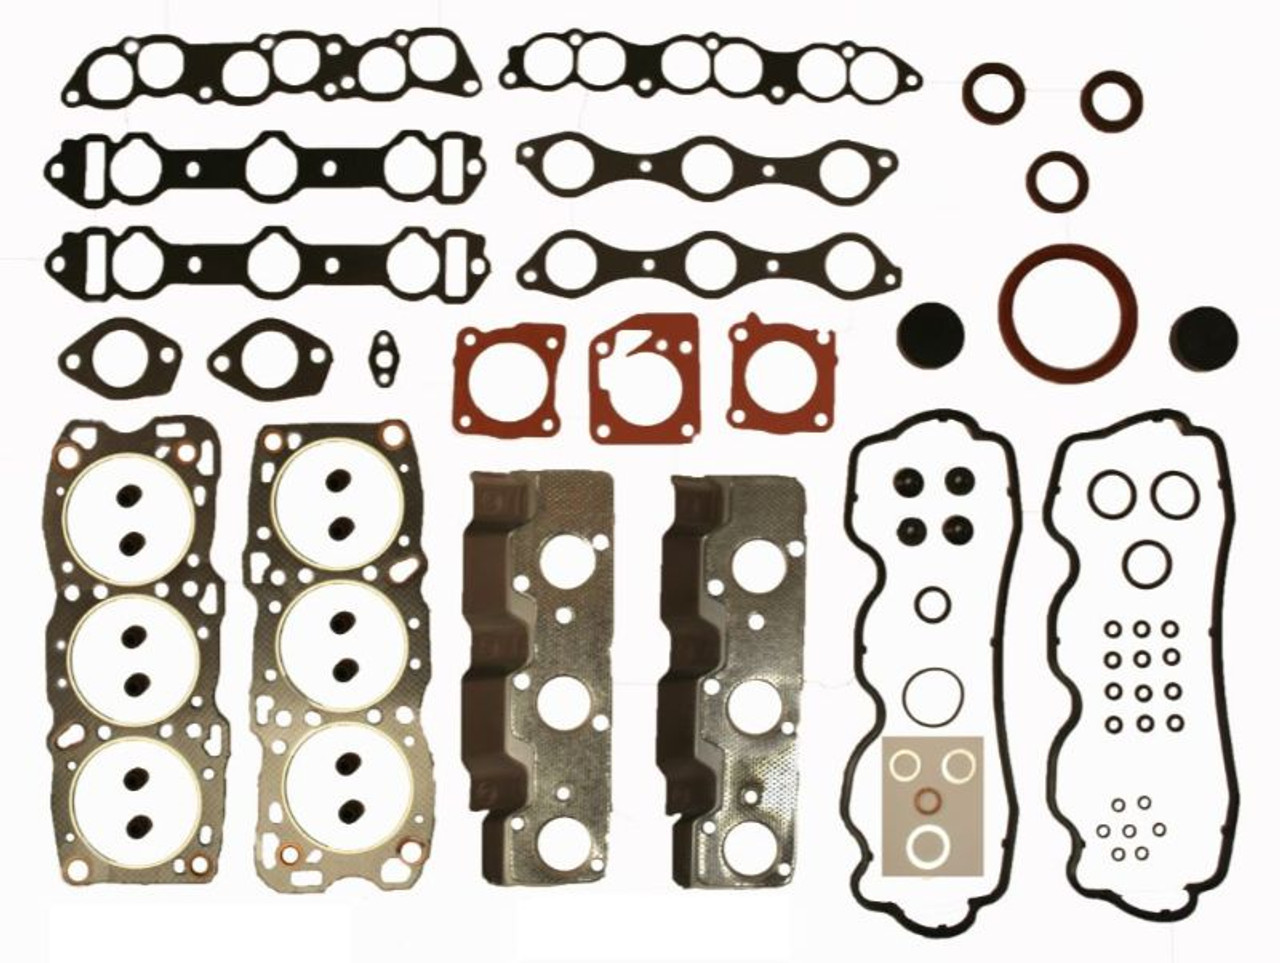 1996 Plymouth Voyager 3.0L Engine Gasket Set CR3.0-49 -82